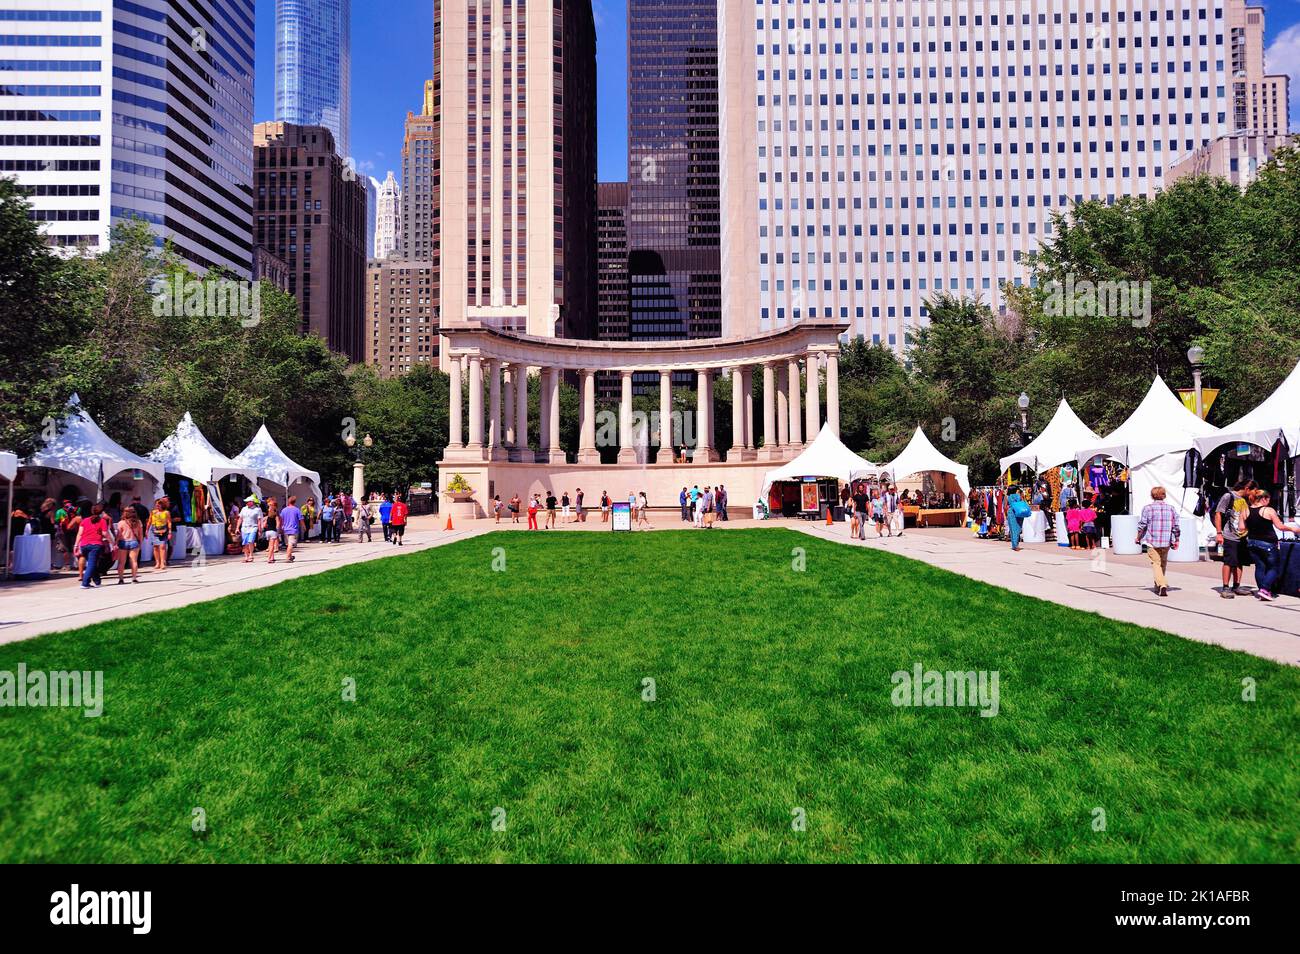 Chicago, Illinois, USA. Tents erected for the Chicago Jazz Festival dot the lawn area at Wrigley Square in Millennium Park. Stock Photo